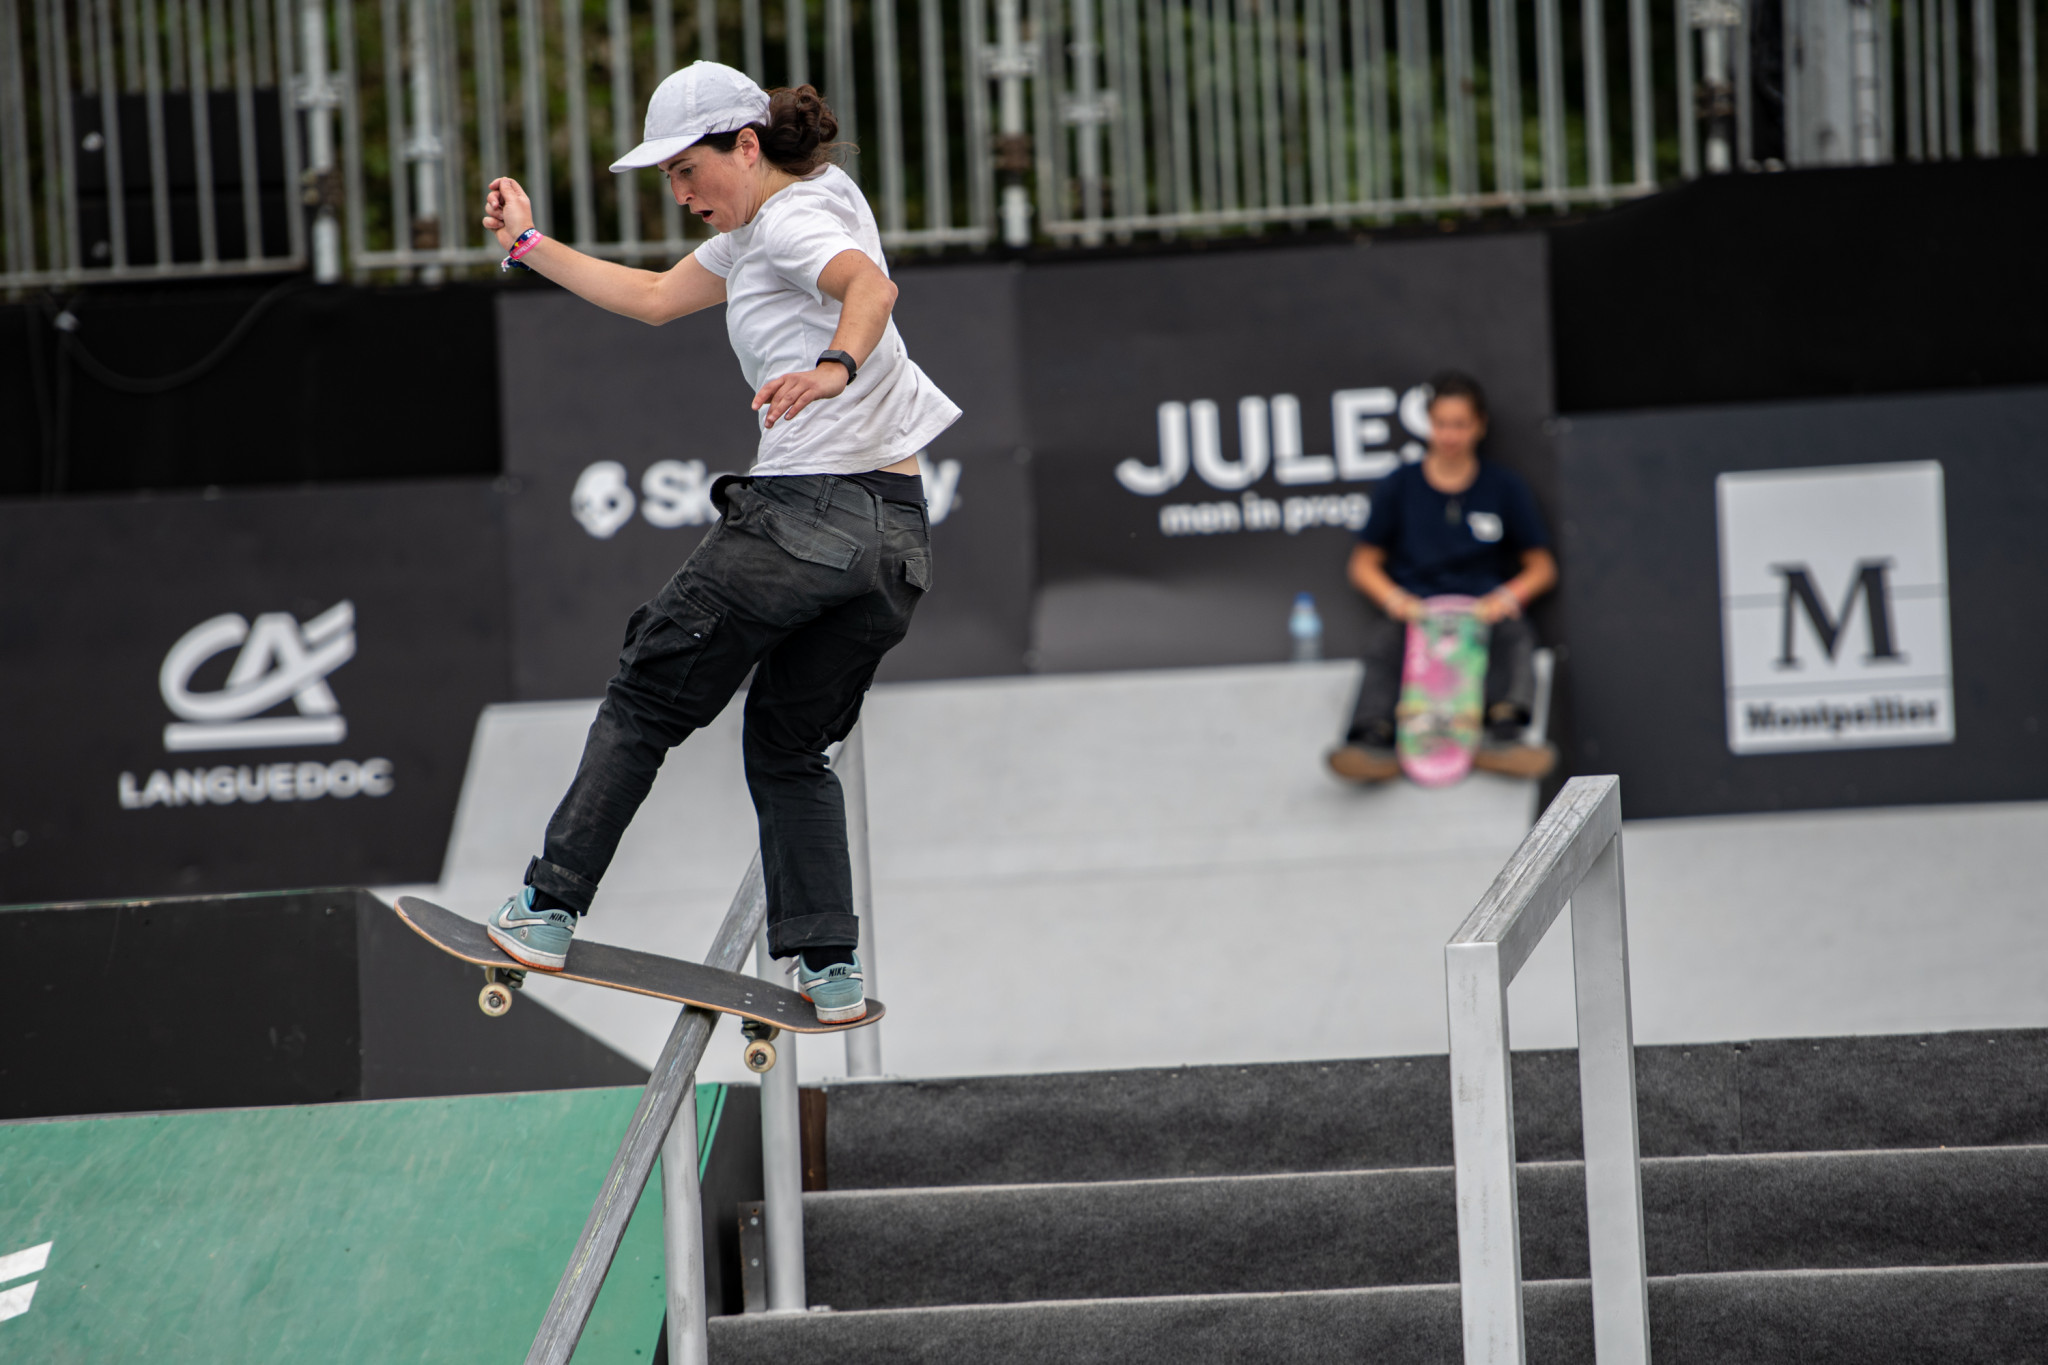 Hym takes first gold medal of FISE Montpellier 2022